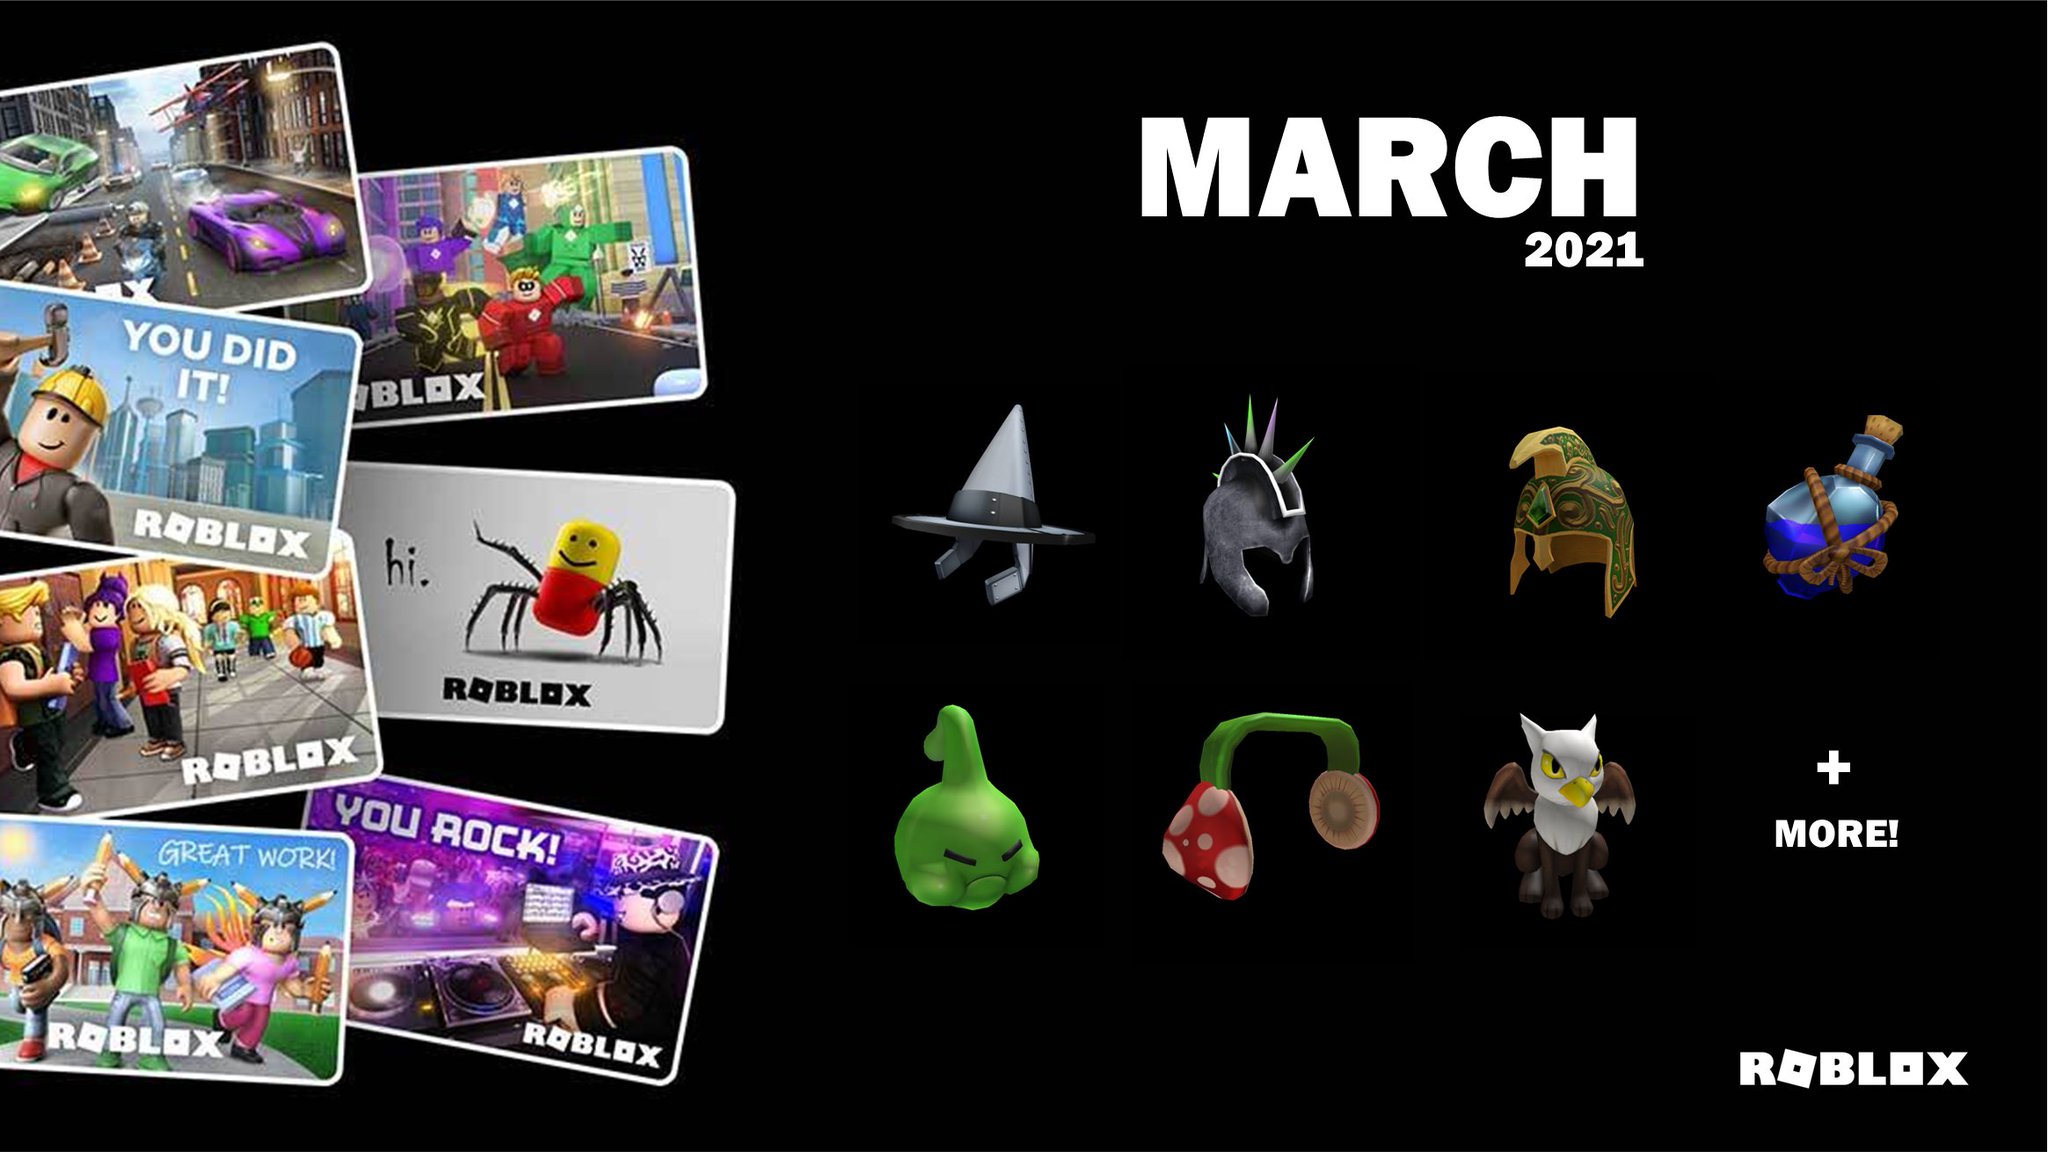 Bloxy News On Twitter The Roblox Gift Card Virtual Items And Their Corresponding Stores For March 2021 Are Now Available Check Them Out Here Https T Co Pujwqlz5yt Purchase A Gift Card Https T Co Sedyuakbde - roblox's account 2021